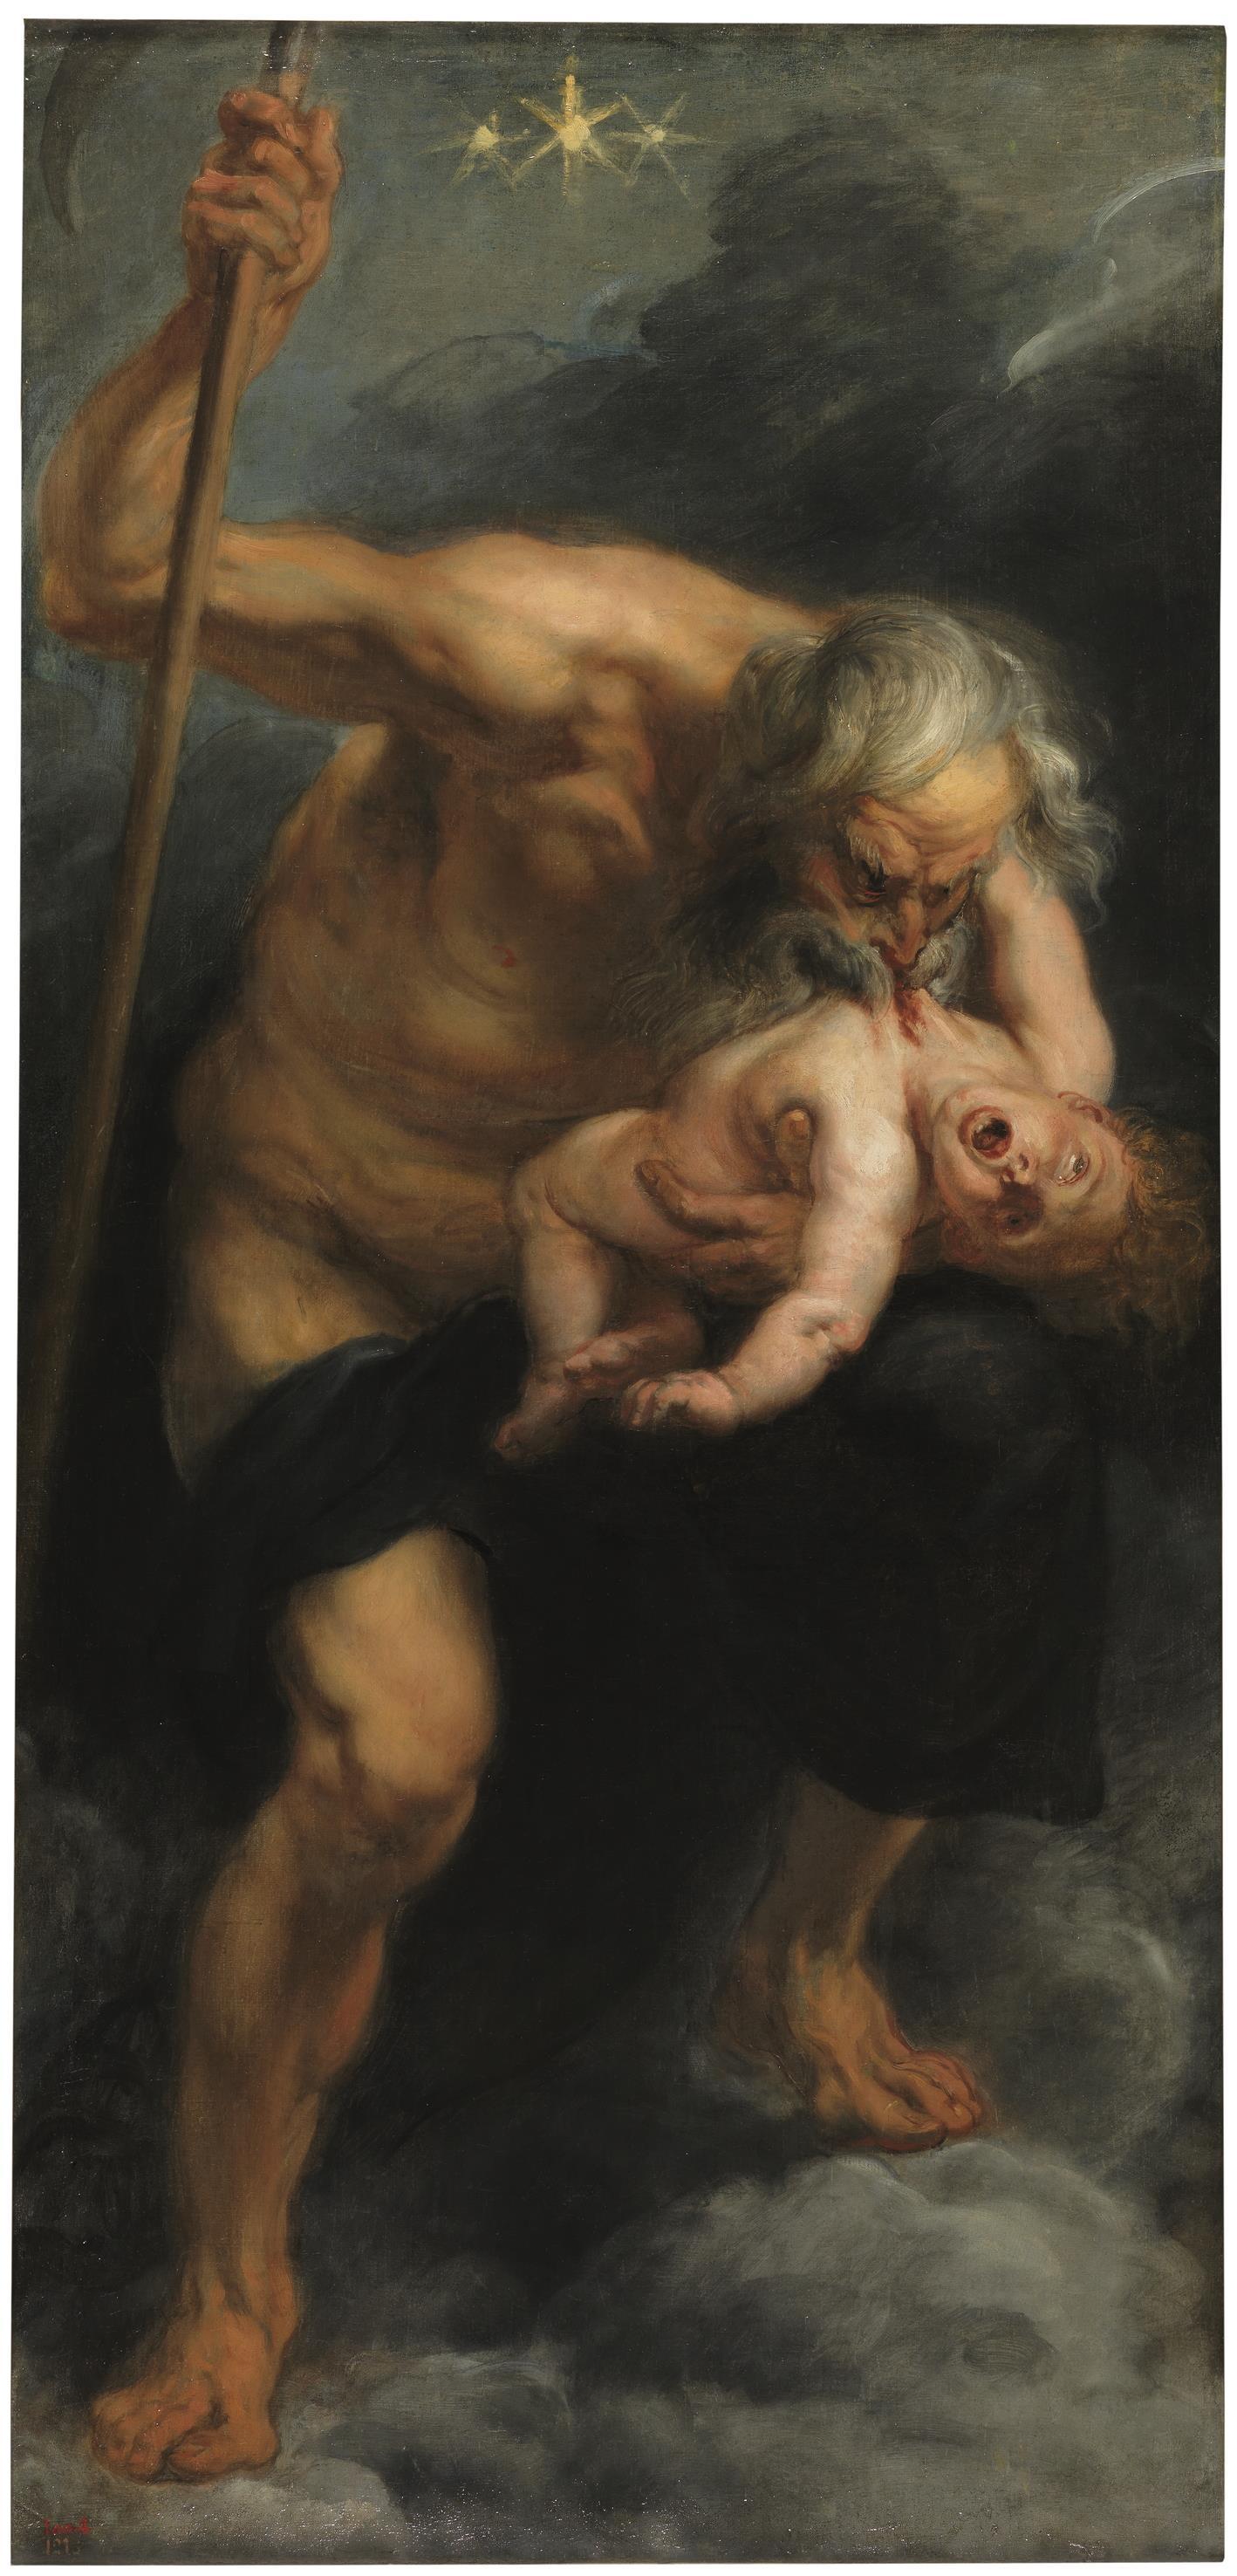 Essay based on the paintings of Francisco Goya Saturn devouring his son, Fight with clubs, Dog. Author: Murad Ibragimov - My, Francisco Goya, , Saturn Devouring His Son, Longpost